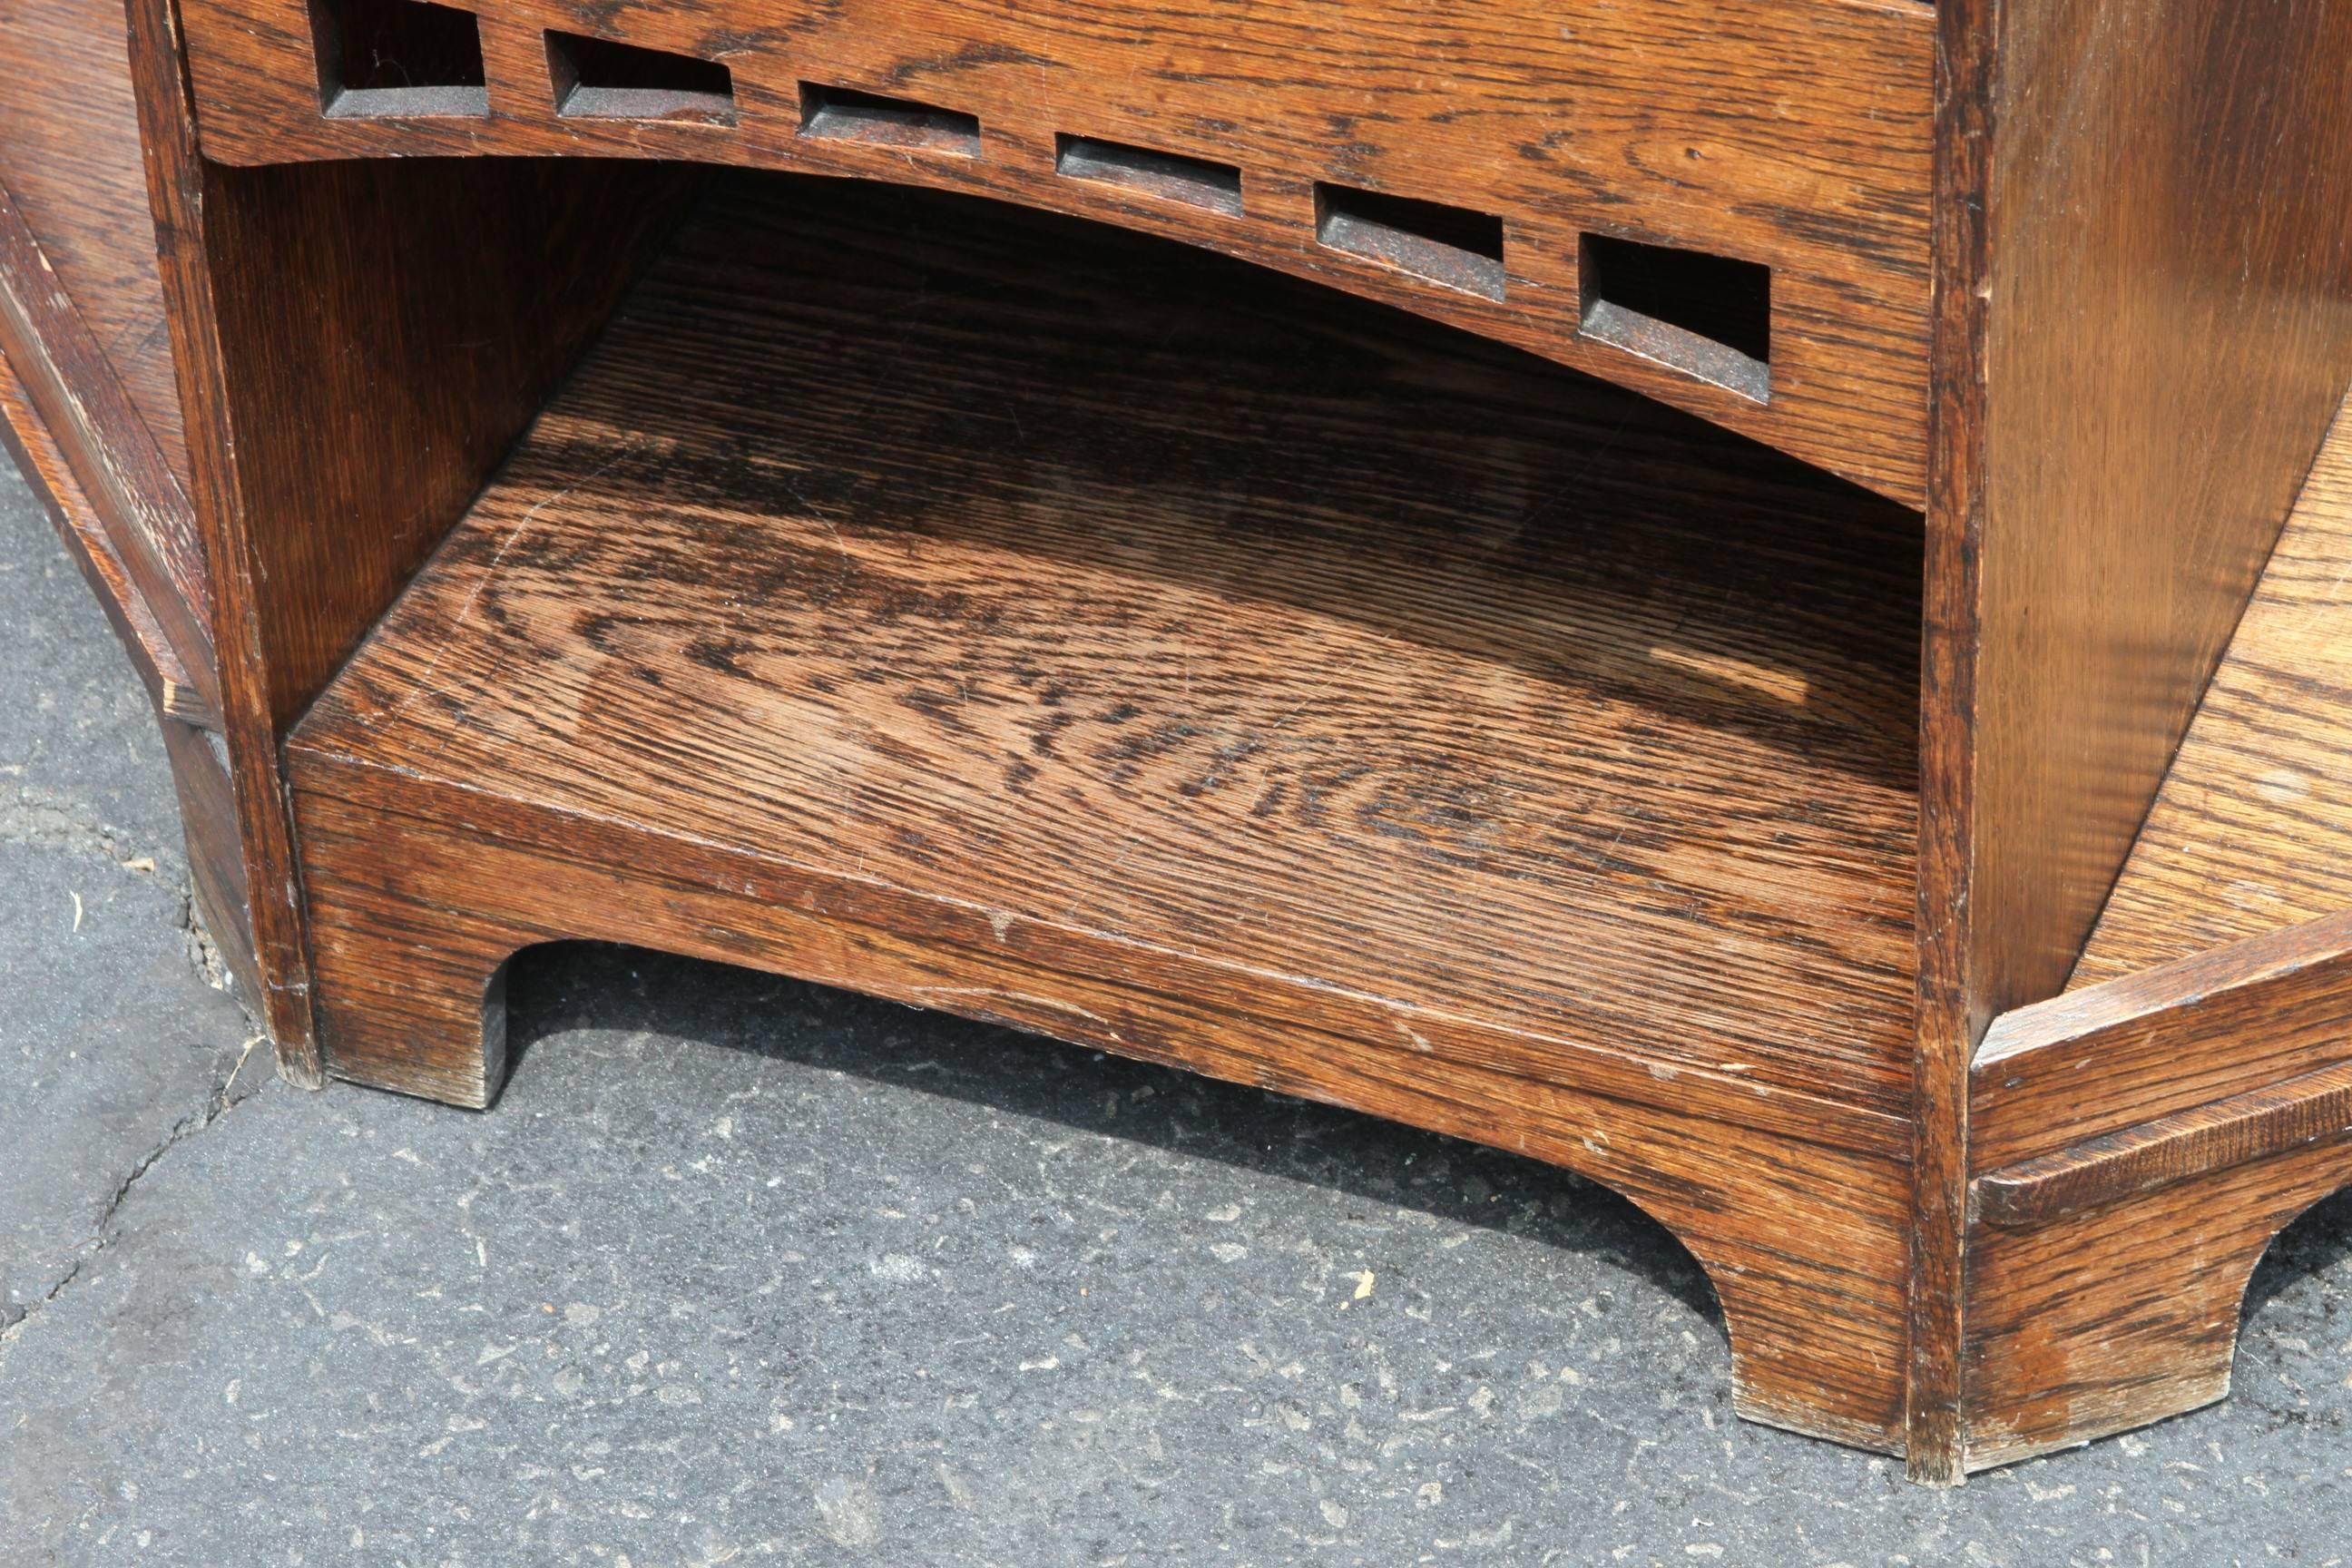 Mirror Barber Brothers Arts and Crafts Hall Bench, circa 1900-1910